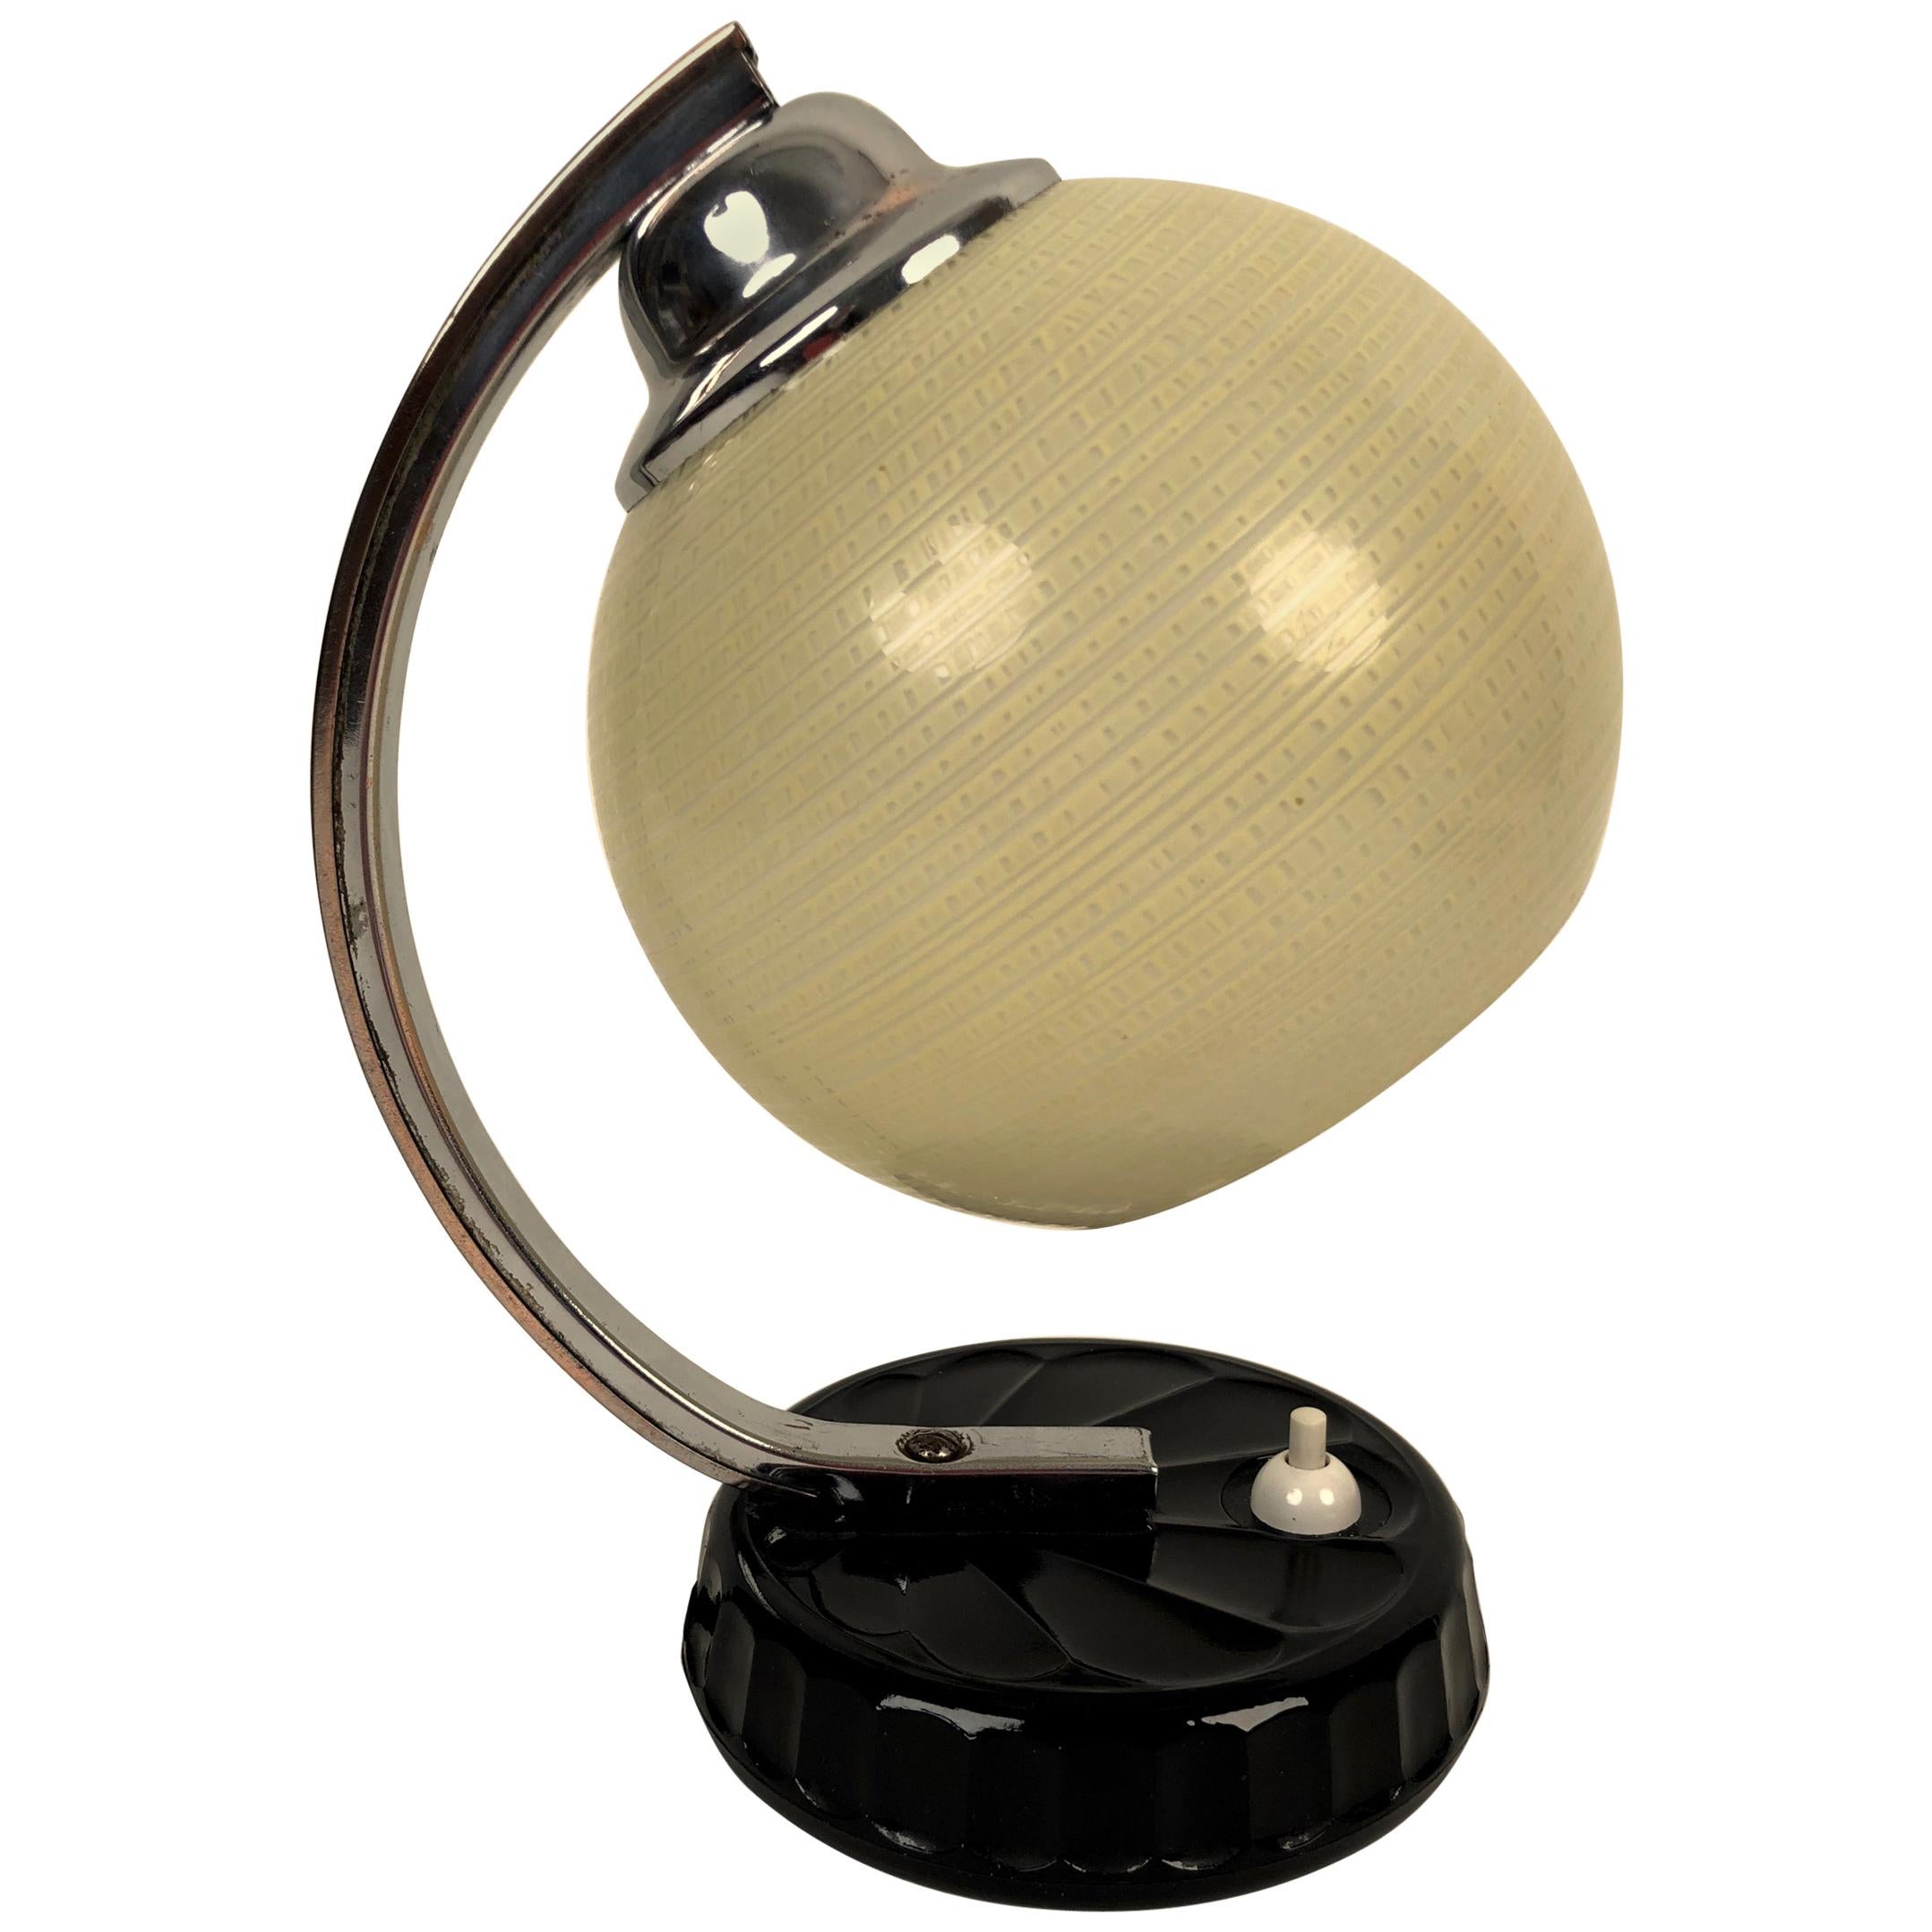 Art Deco Table Lamp from the Czech Republic, from CMS Krasno